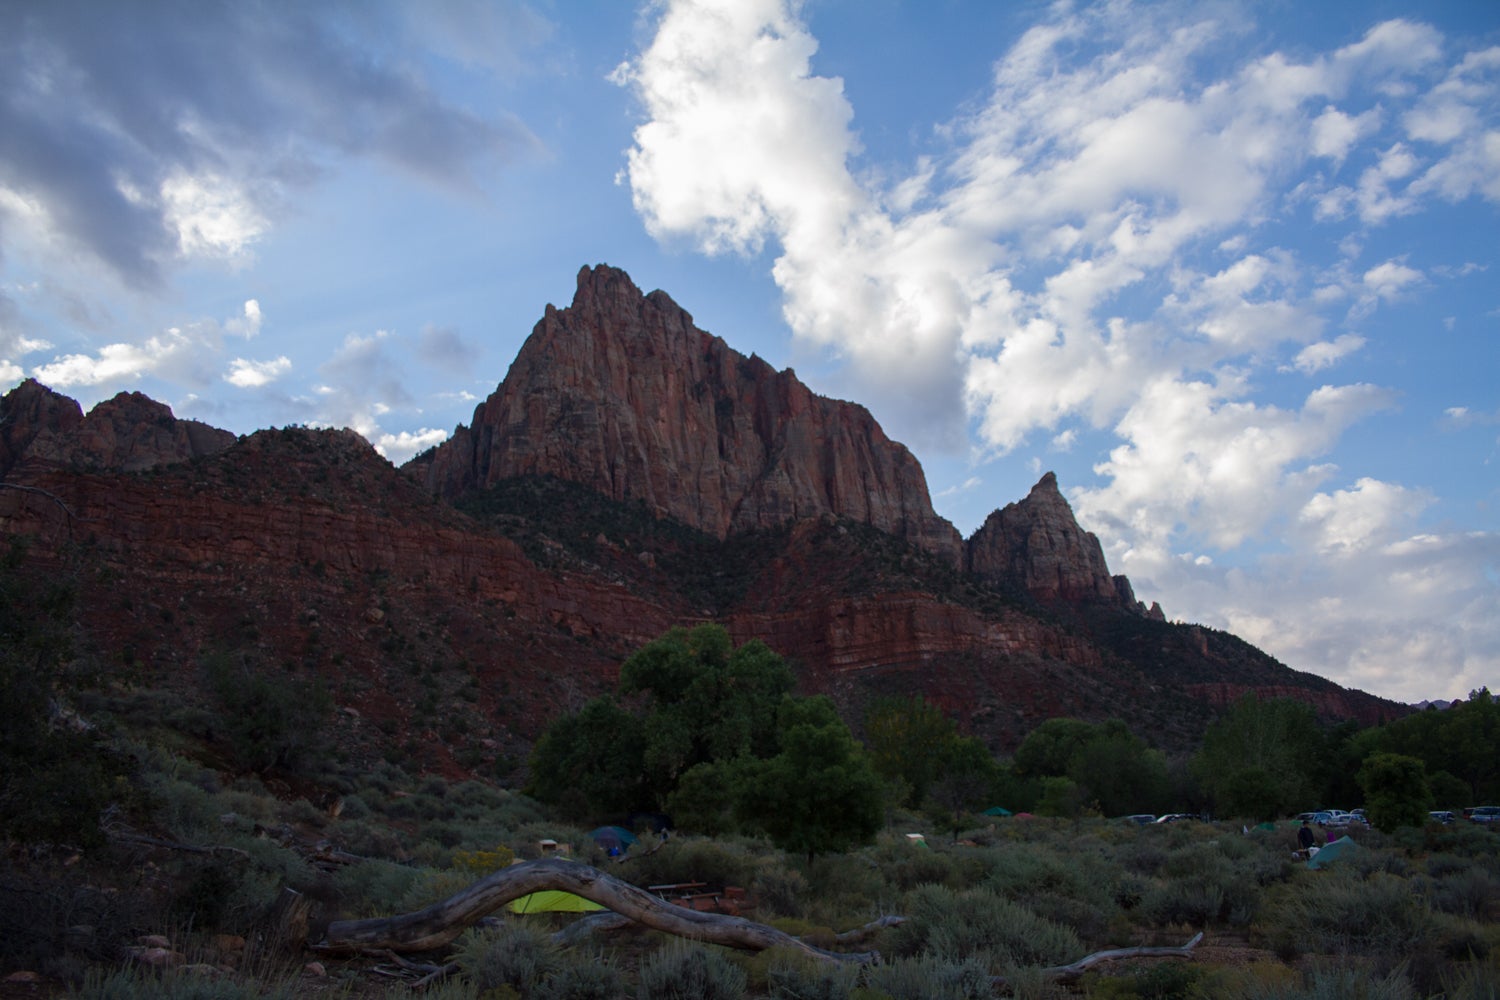 Camping in Zion National Park